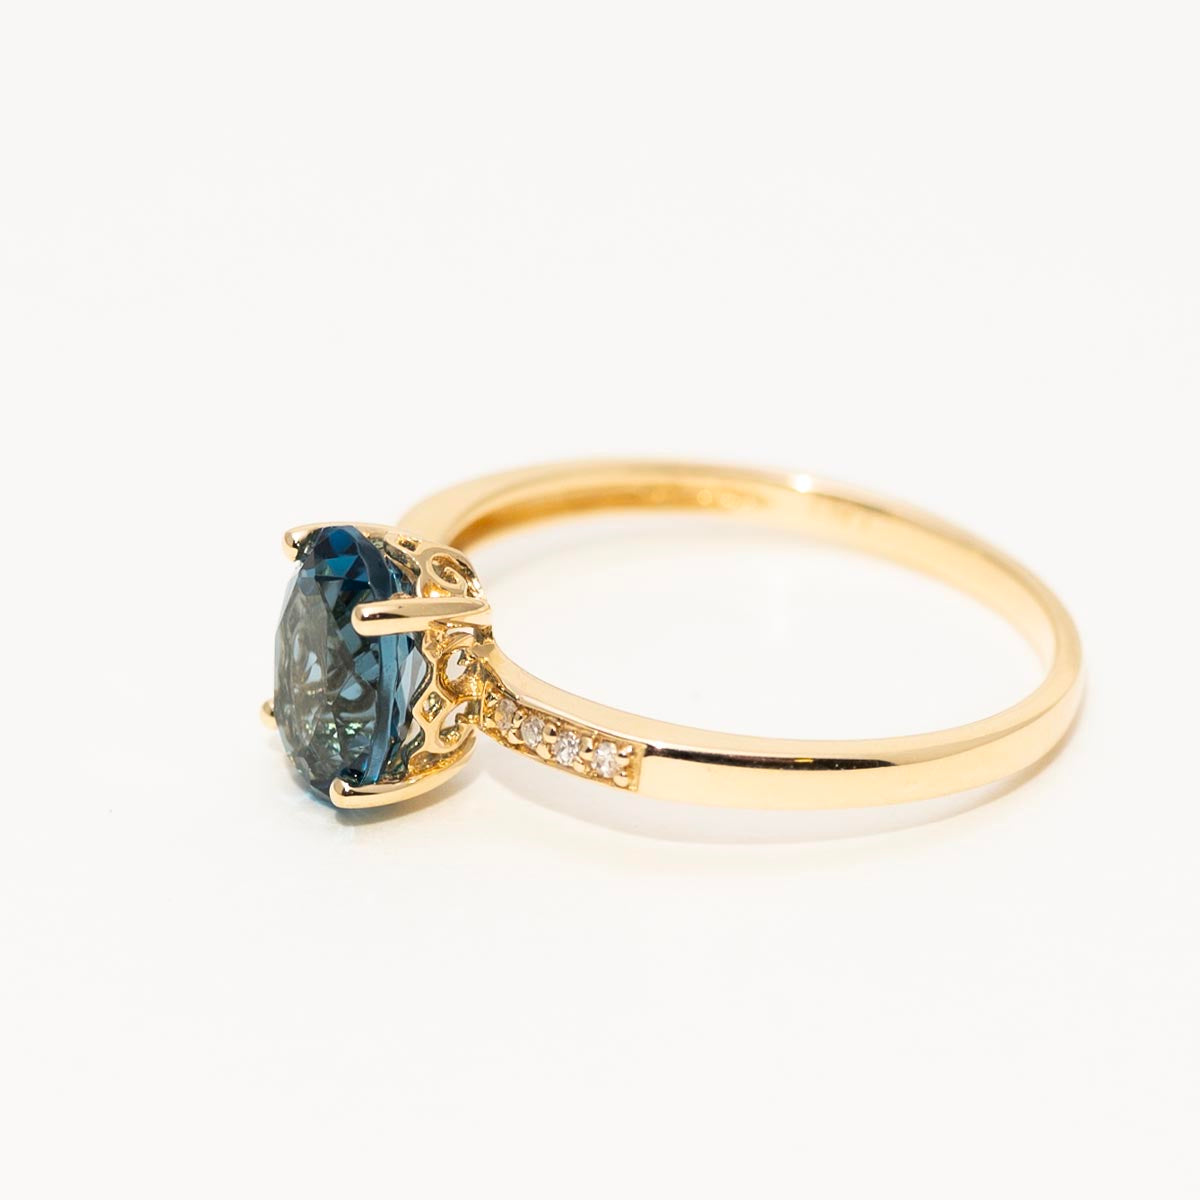 Oval London Blue Topaz Ring in 14kt Yellow Gold with Diamonds (.03ct tw)